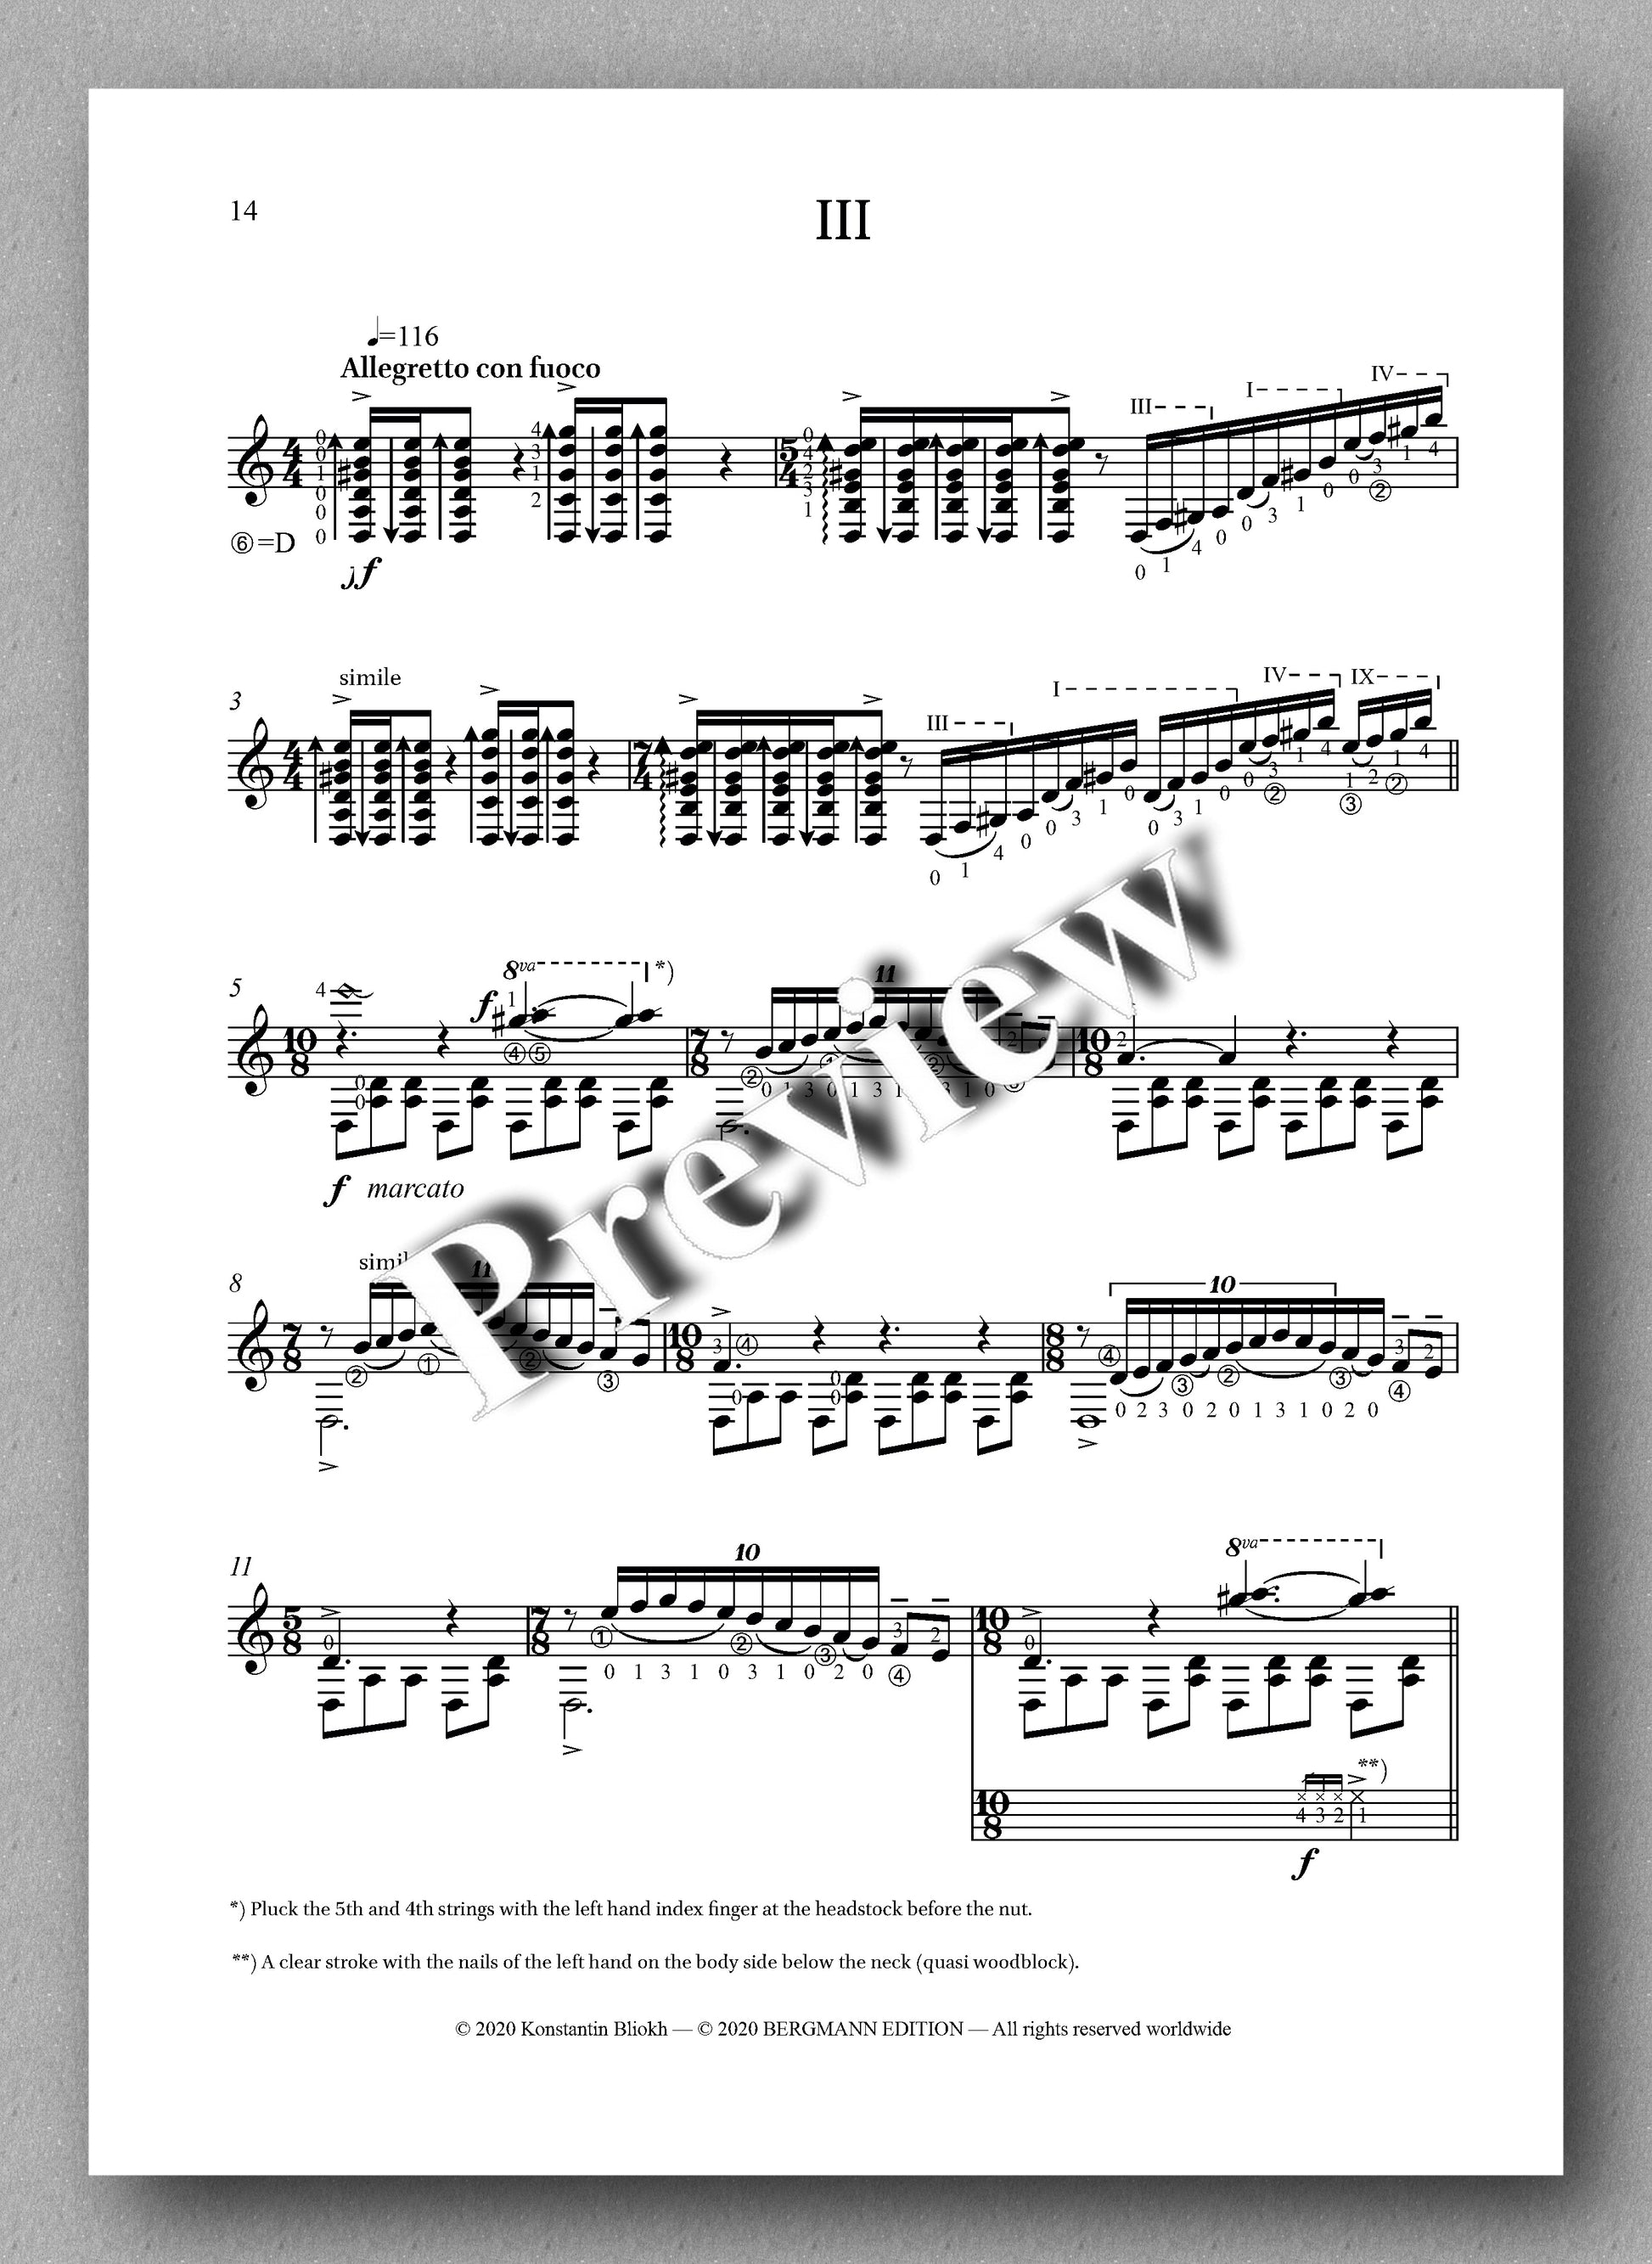 Konstantin Bliokh, Sonata No. 3, GALWAY - preview of the music score 3